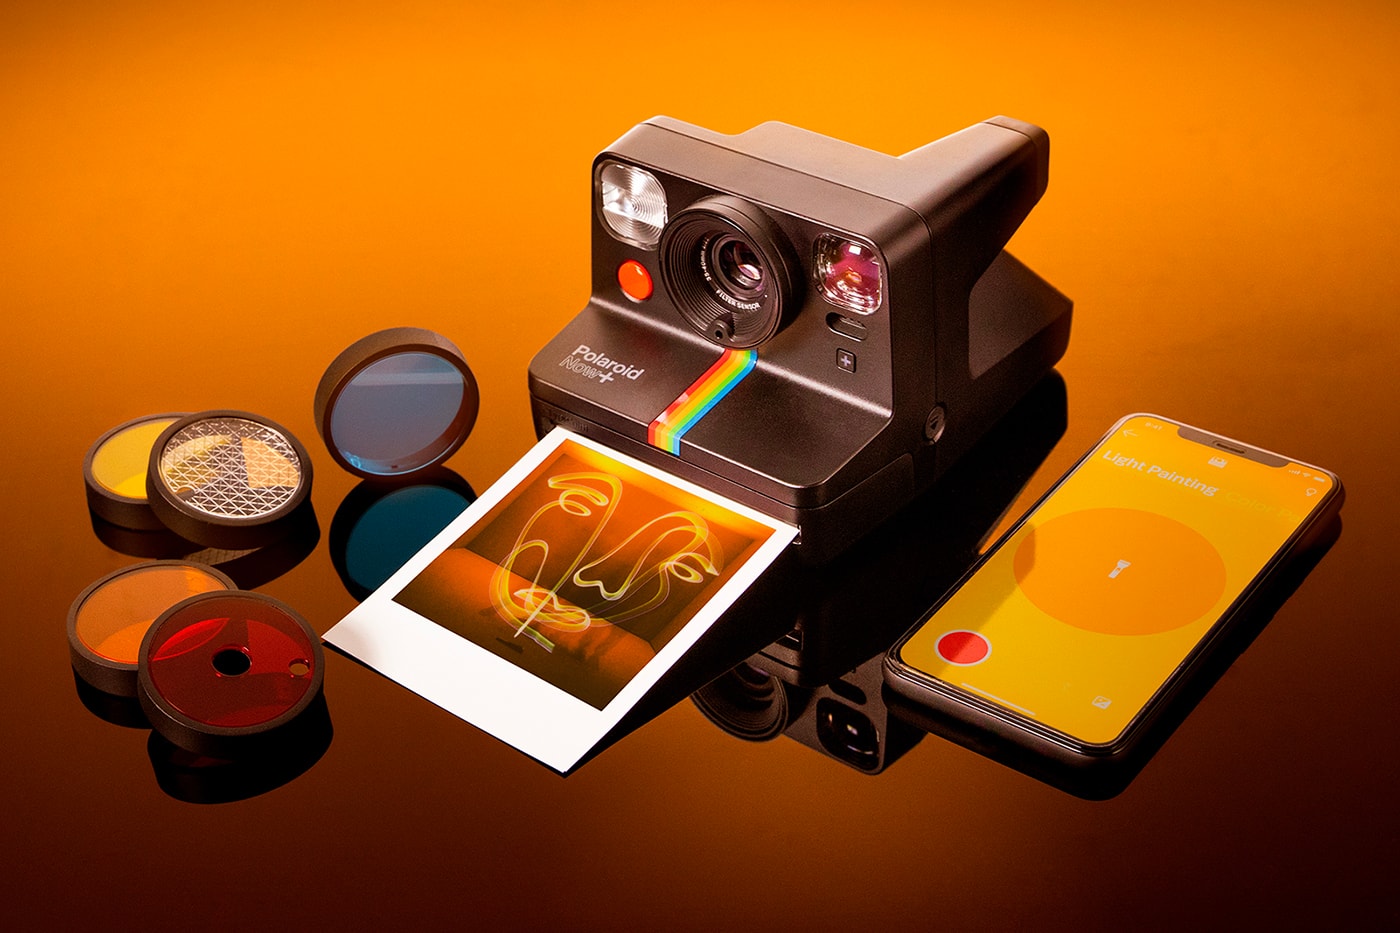 Polaroid cameras are back: 6 instant-print cameras that are popular in 2021